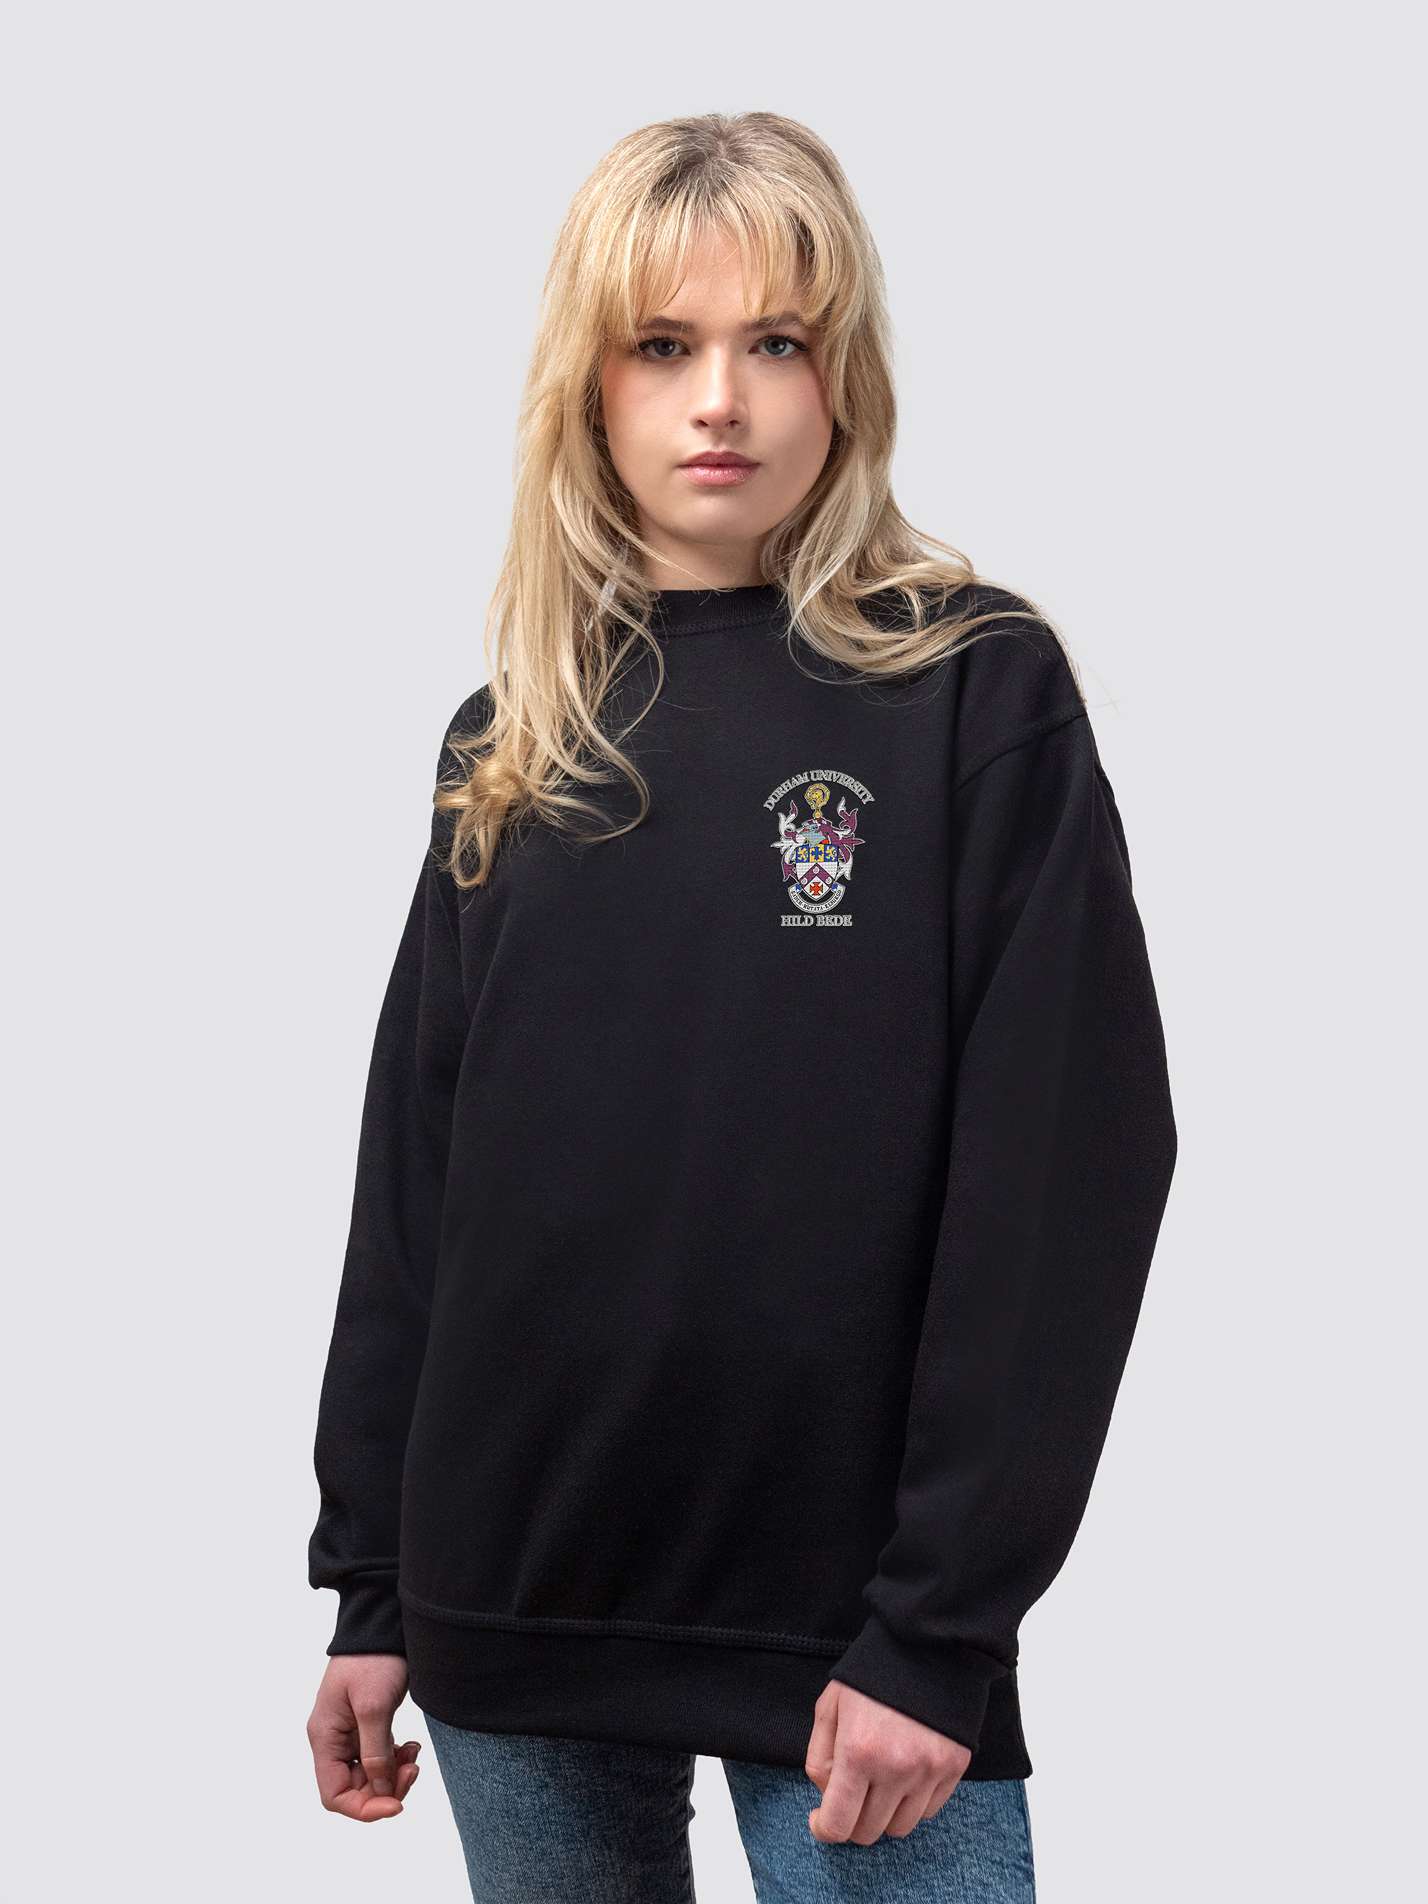 St Hild and St Bede crest on the front of a black, crew-neck sweatshirt